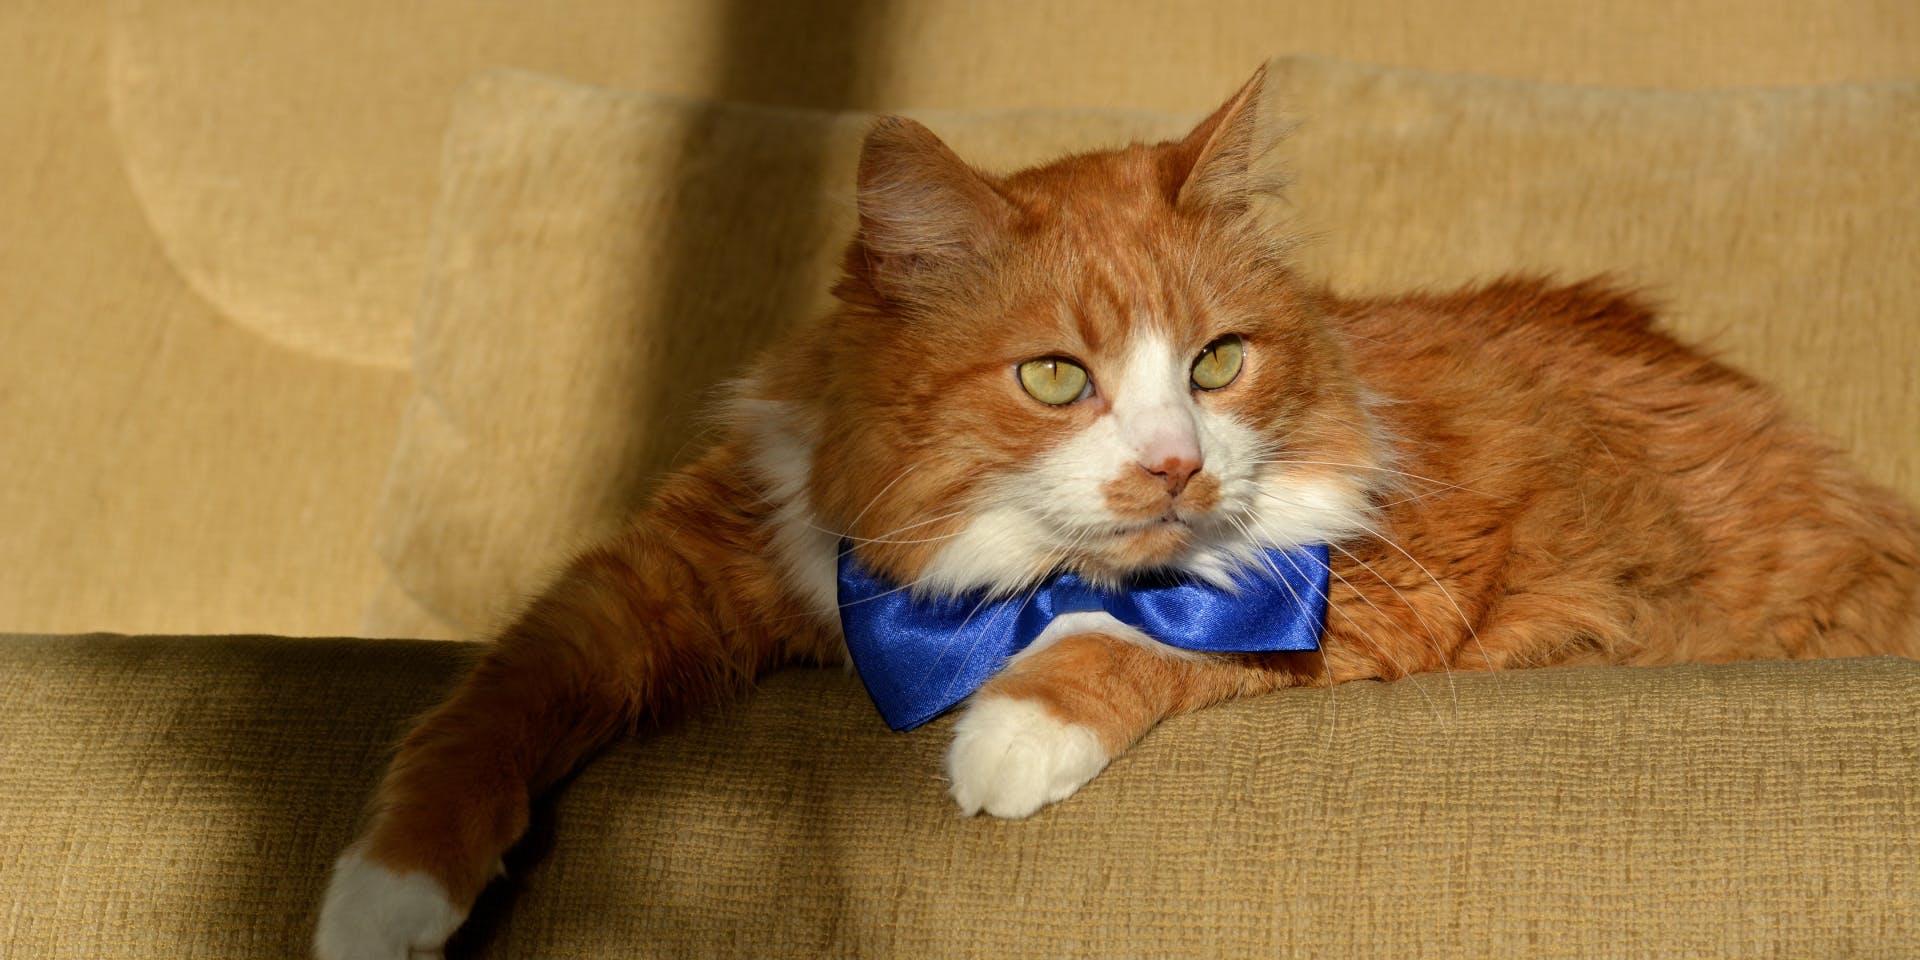 Ginger and white long haired cat with blue bow sitting on a sofa.